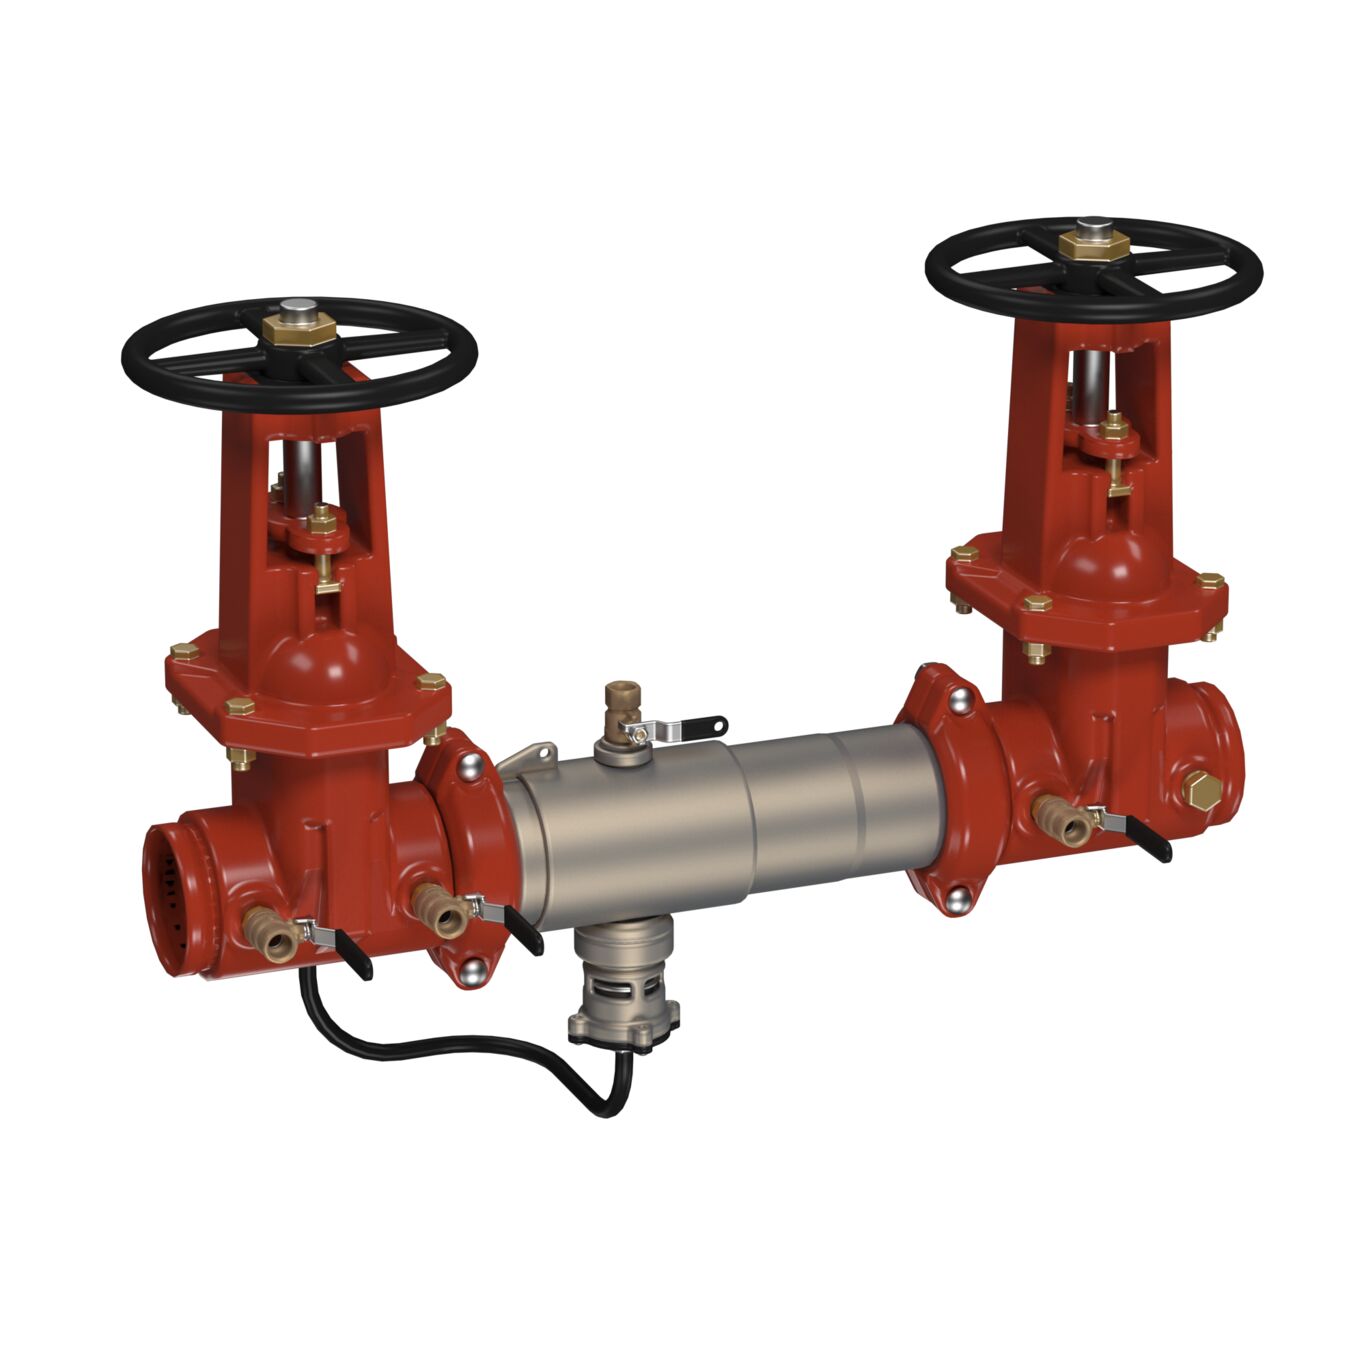 Stainless Steel Reduced Pressure Zone Assembly Backflow Preventer, OSY Shutoff Valves, Grooved Inlet x Grooved Outlet